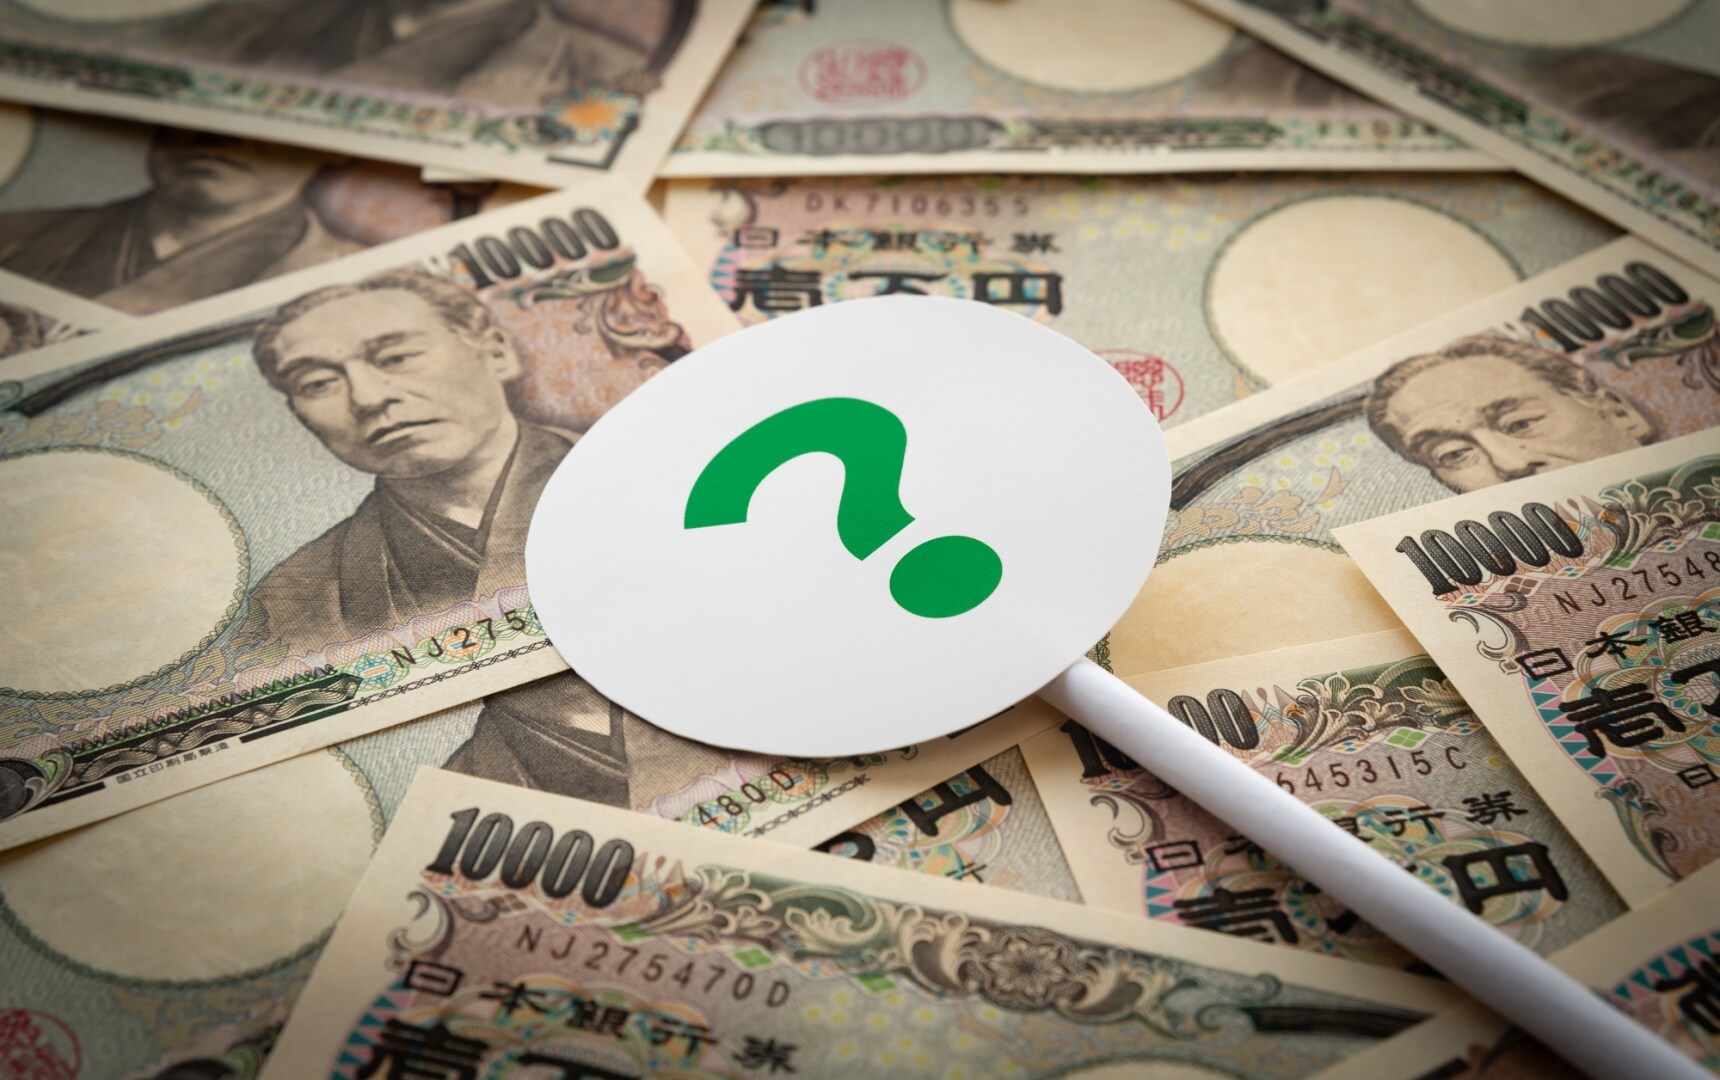 A Guide to the ¥100,000 Stimulus in Japan